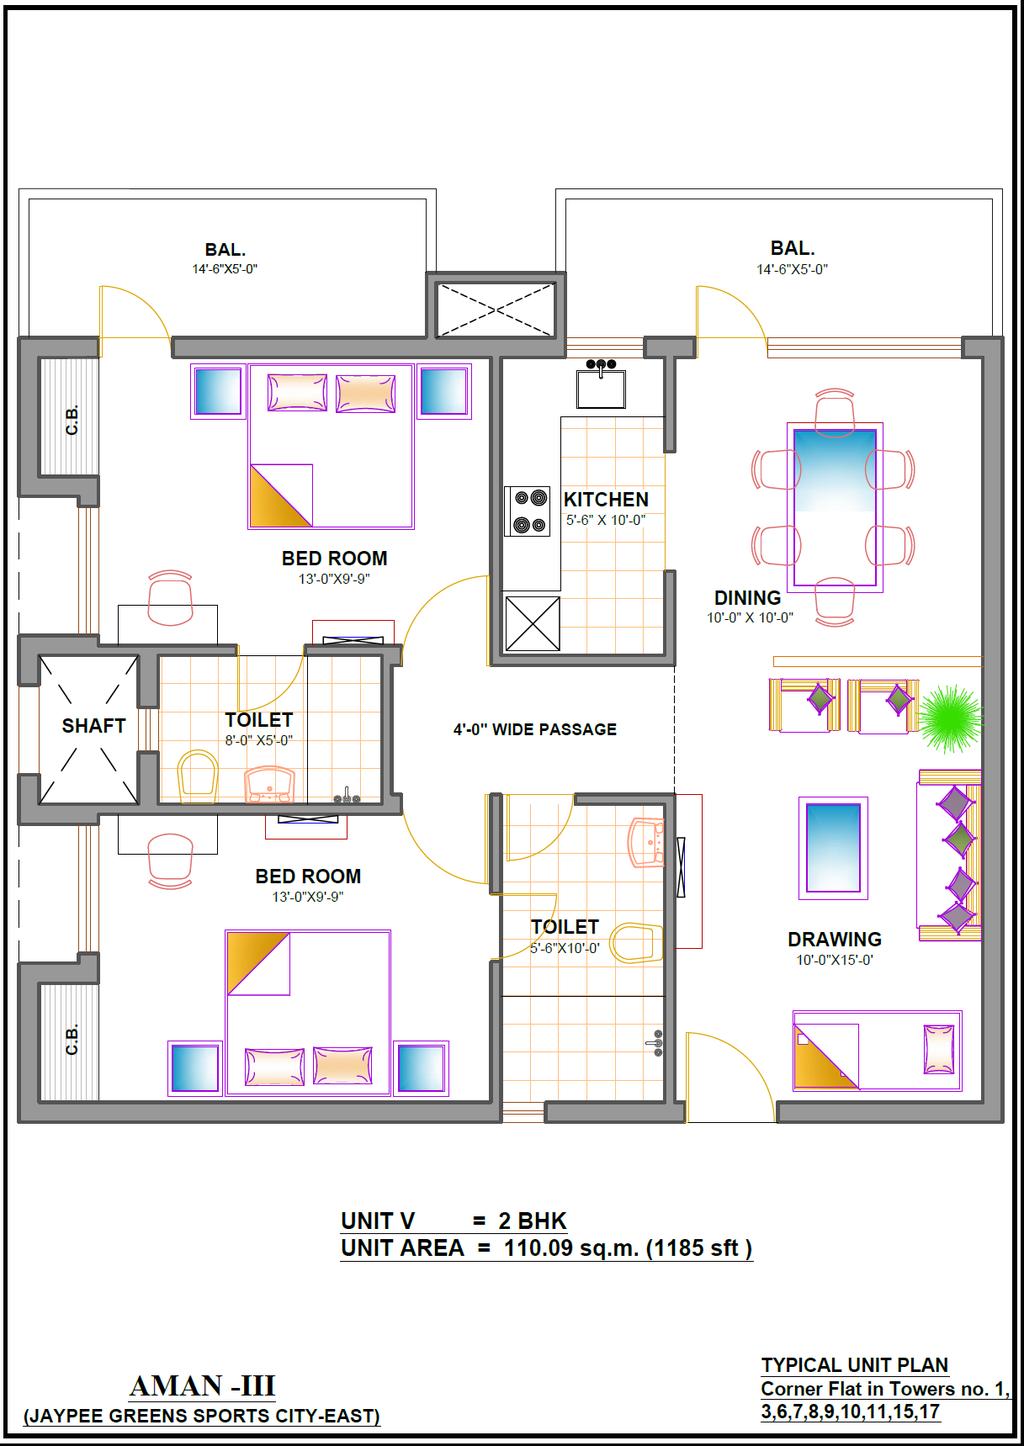 TYPICAL UNIT PLAN (CONCEPT) Note: The Super Area of the apartment as mentioned above is based on concept plans.